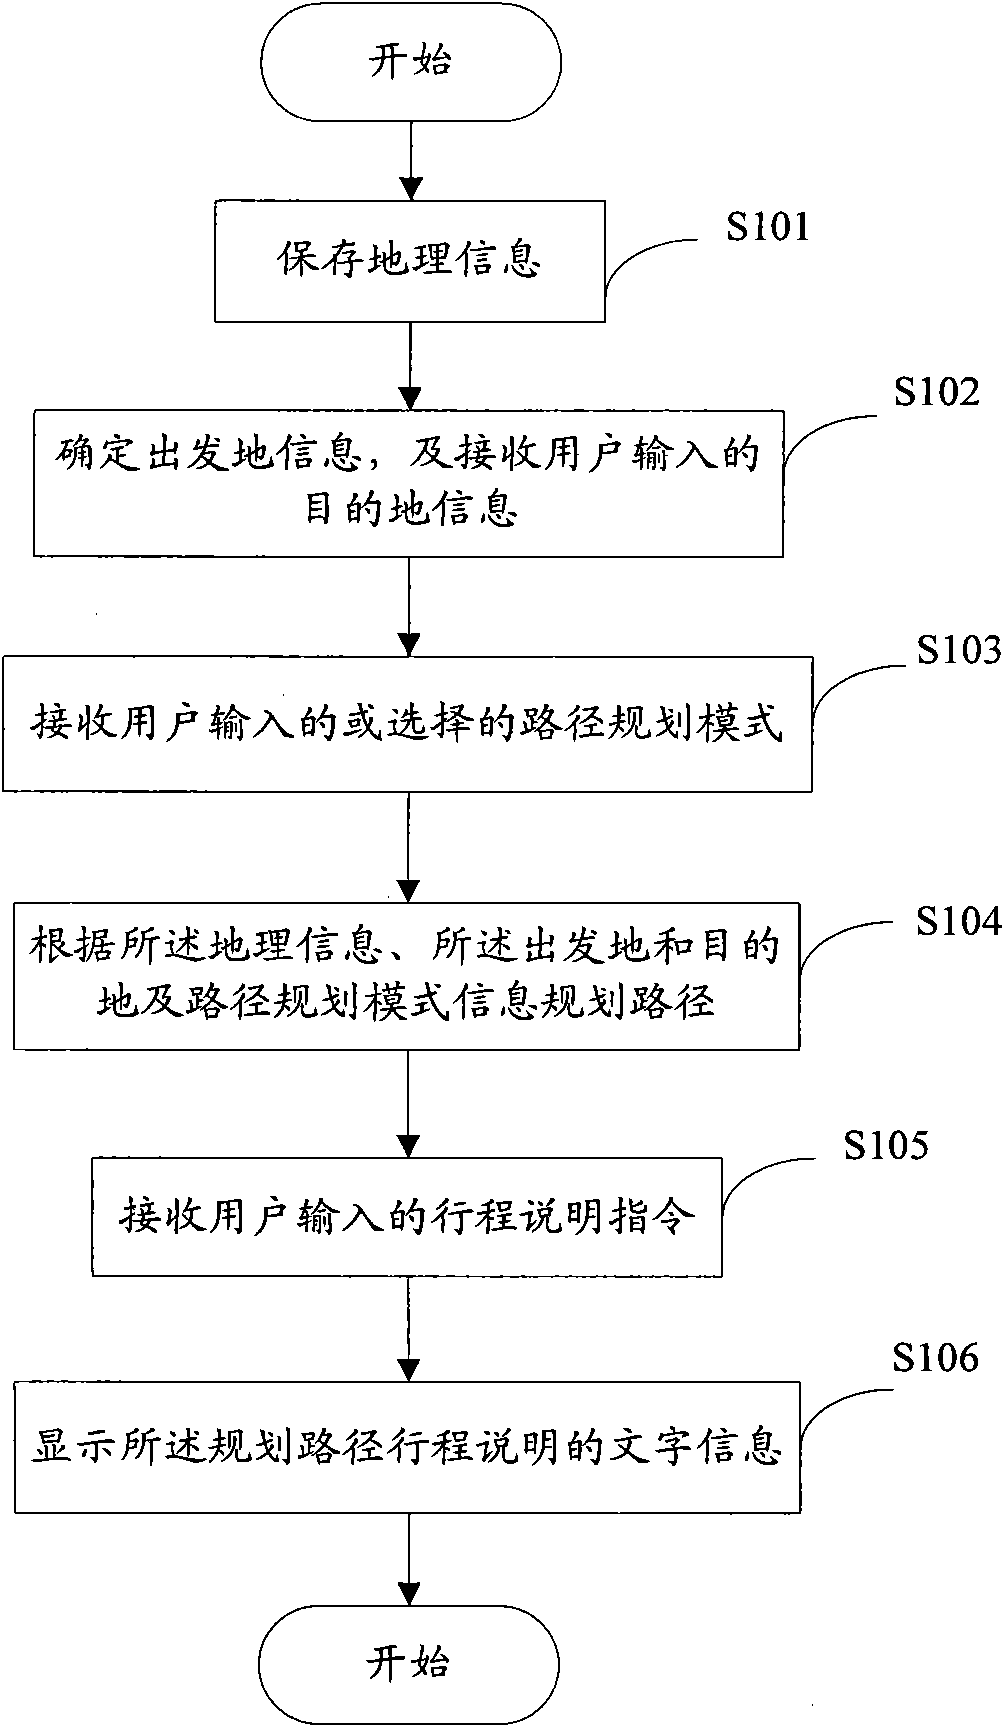 Navigation equipment, method for displaying journey introduction and path thereof and navigation method thereof